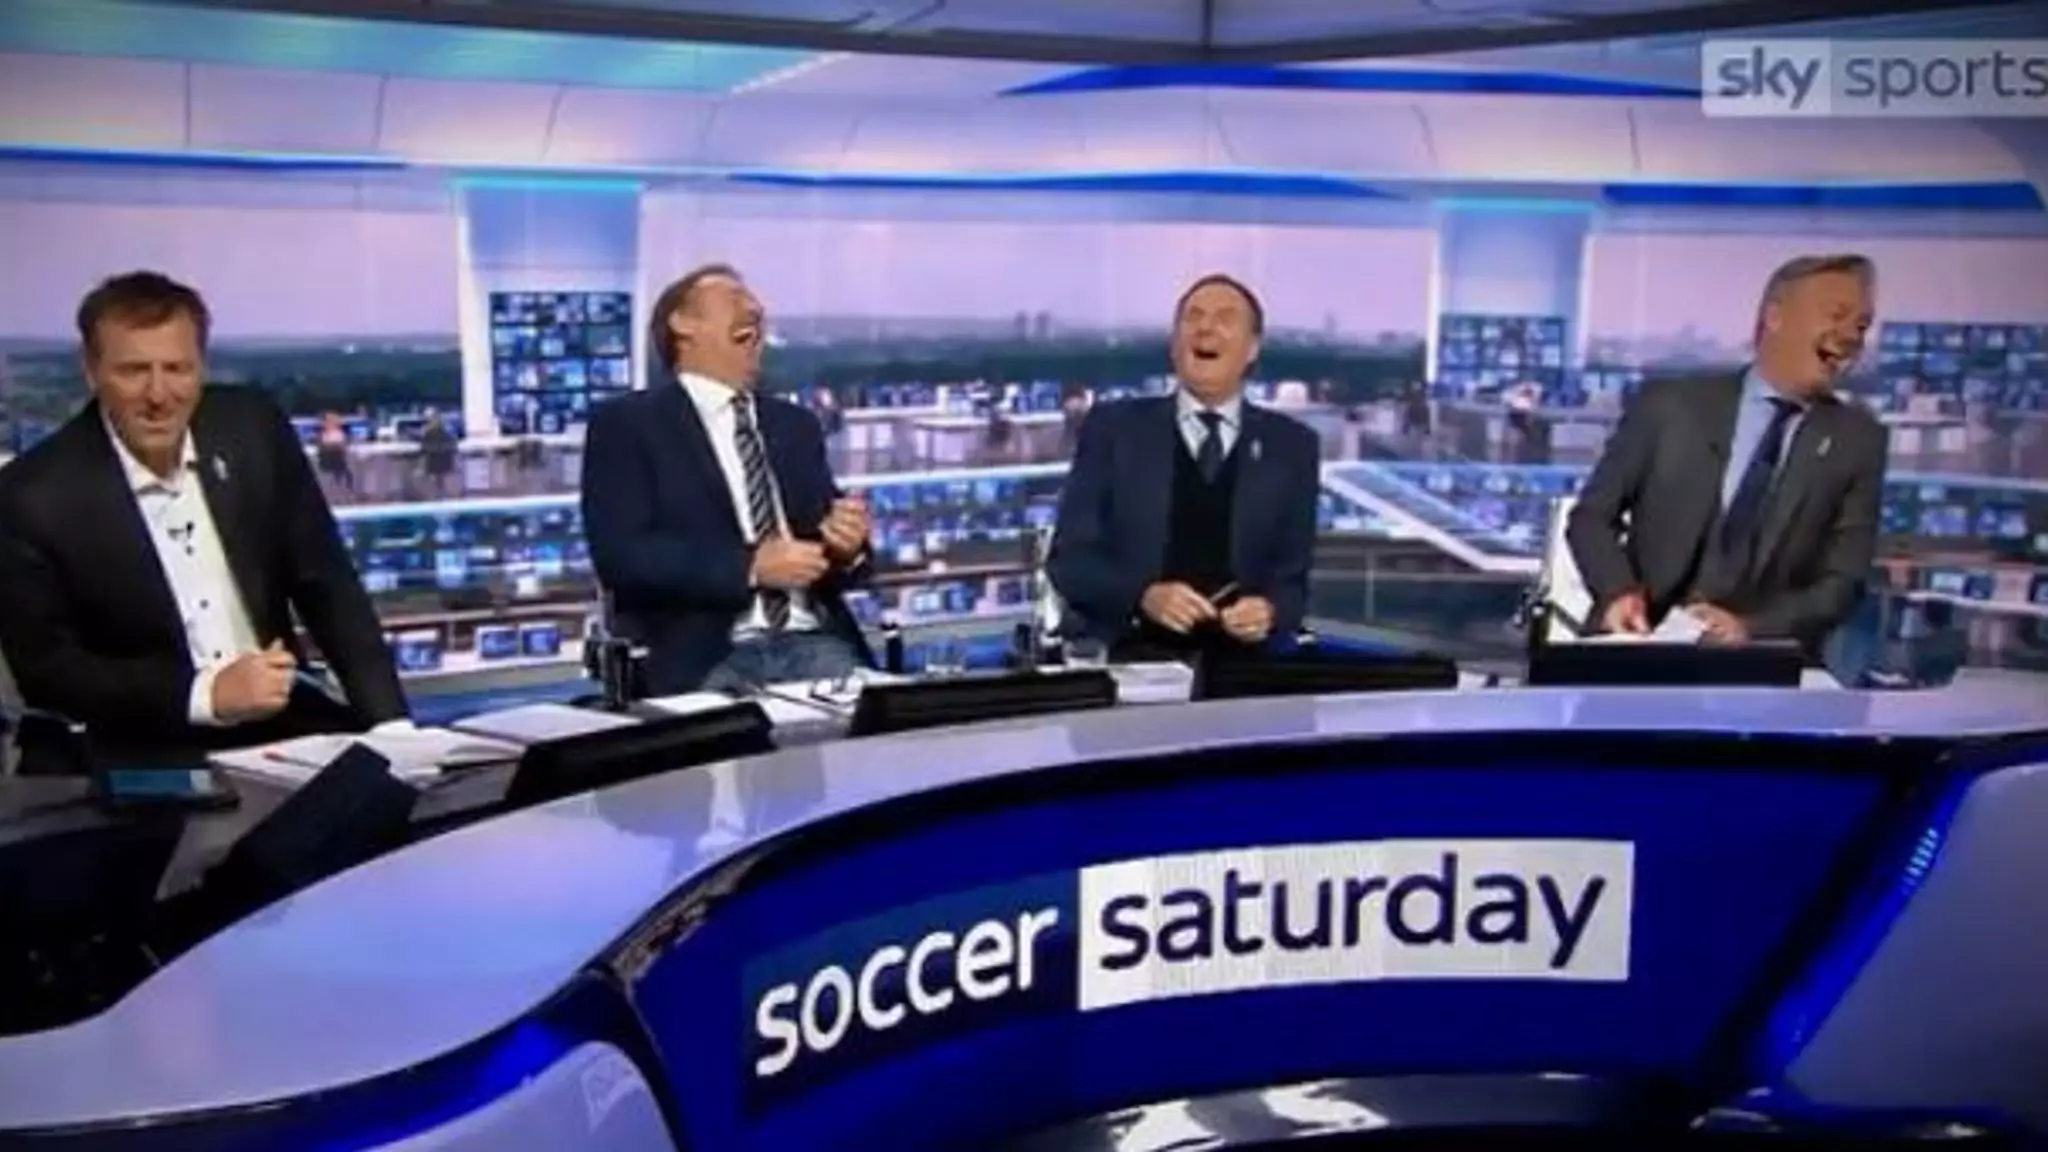 The old panel had been together for quite some time. Image: Sky Sports